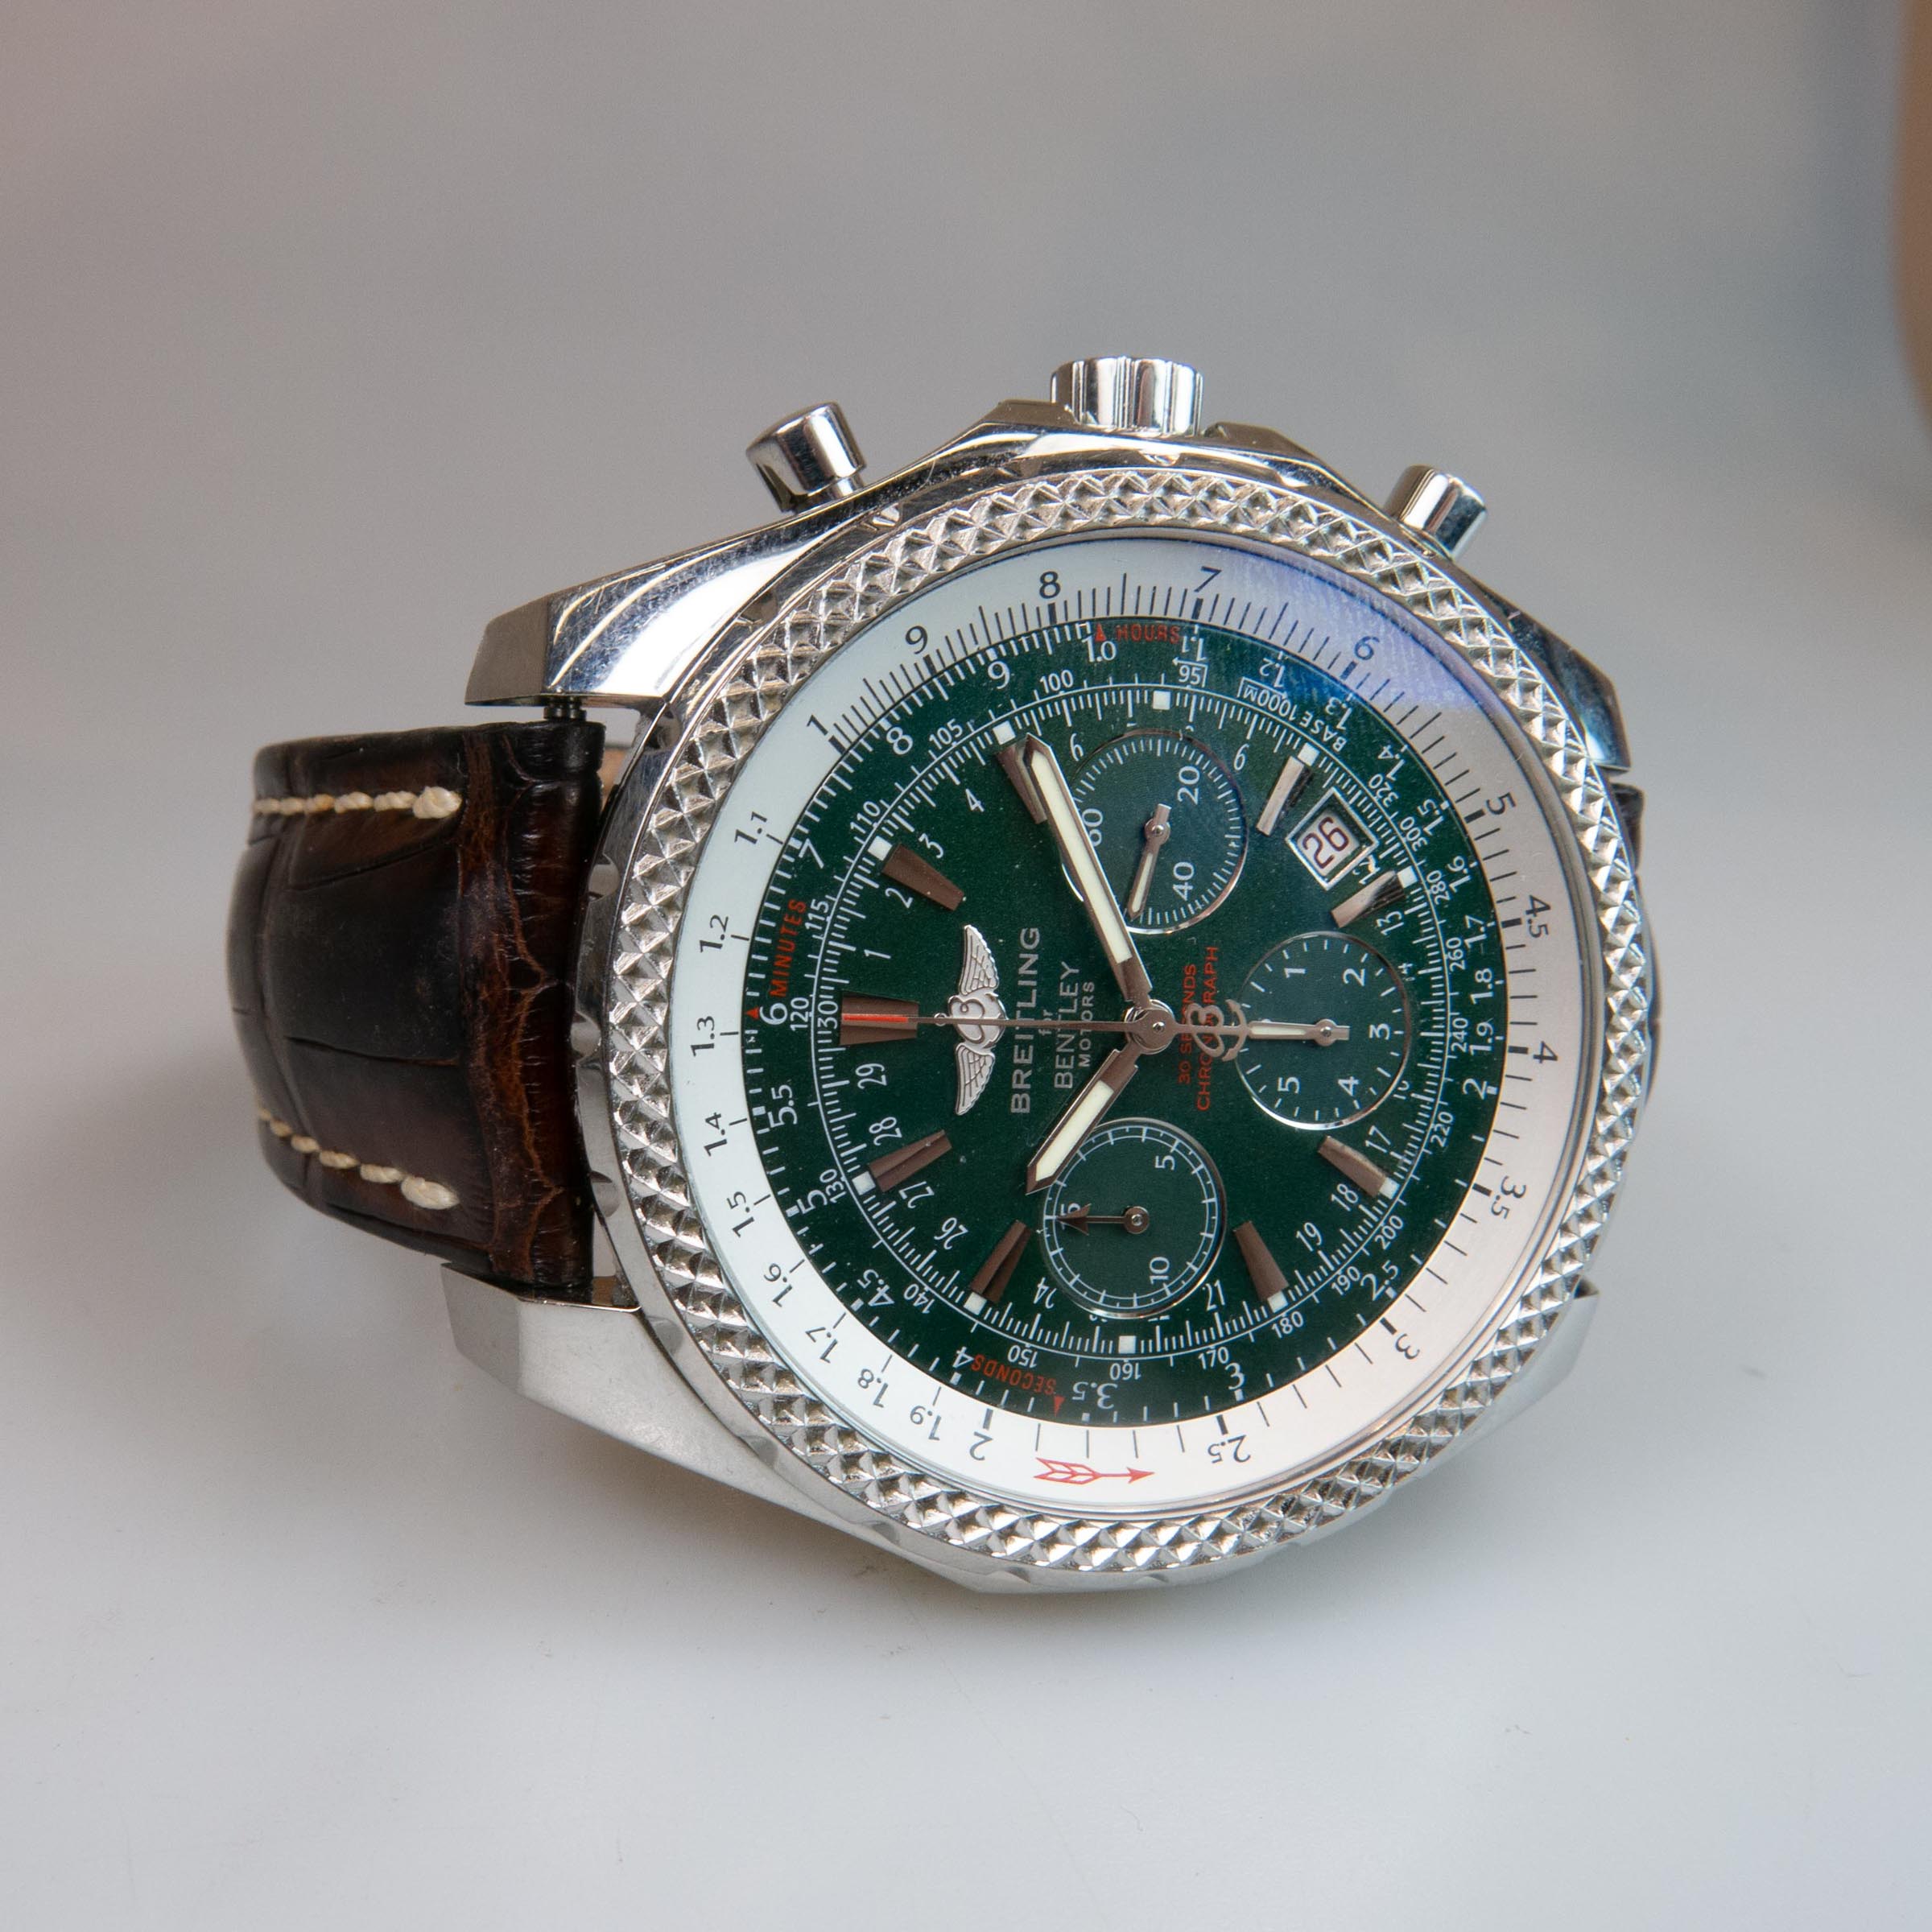 Breitling For Bentley Motors Limited Edition Wristwatch, With Date And Chronograph